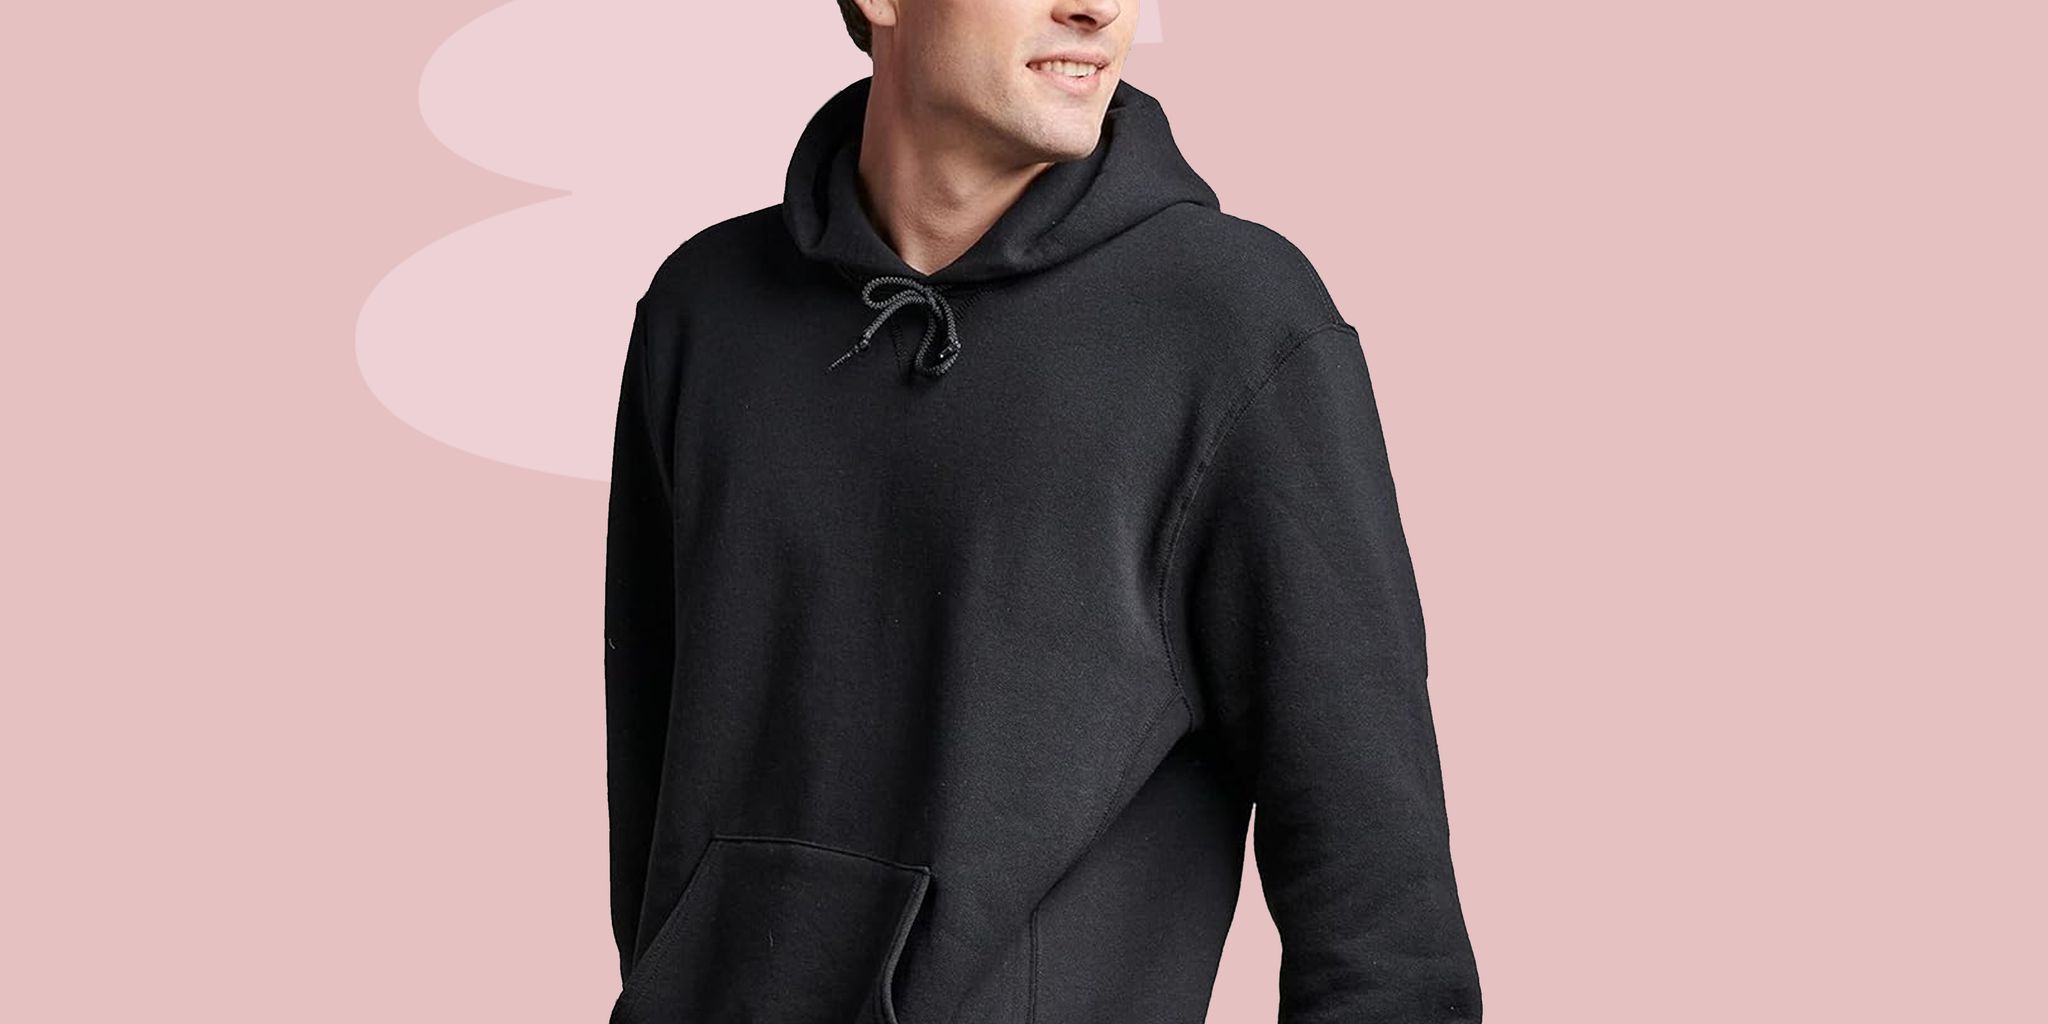 Branded, Stylish and Premium Quality Two Way Zipper Hoodie 